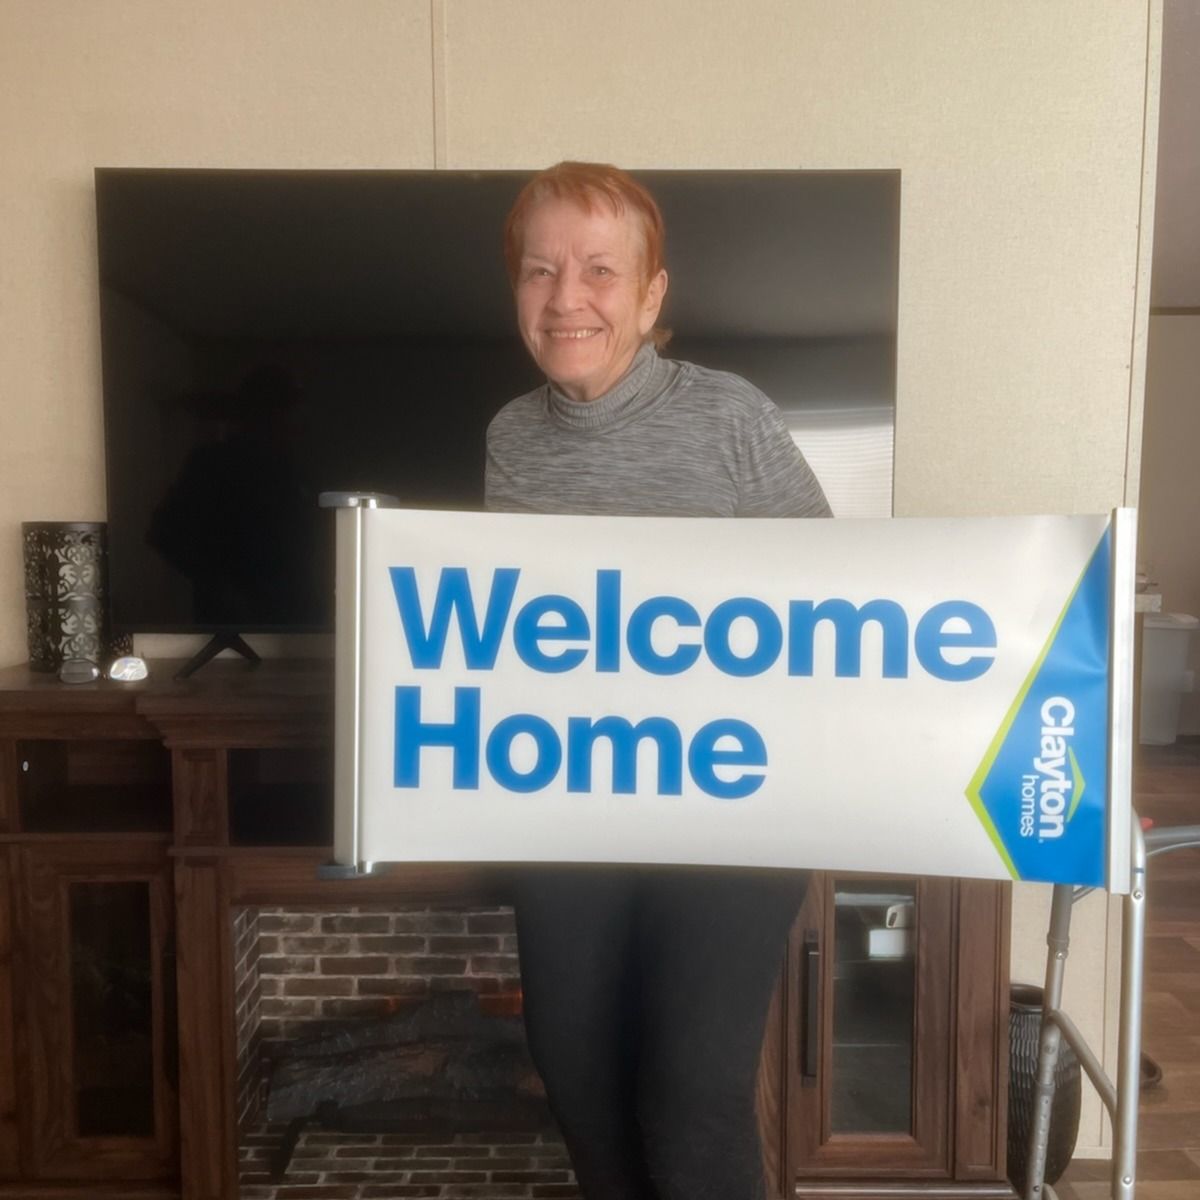 MARGARET VERNA W. welcome home image